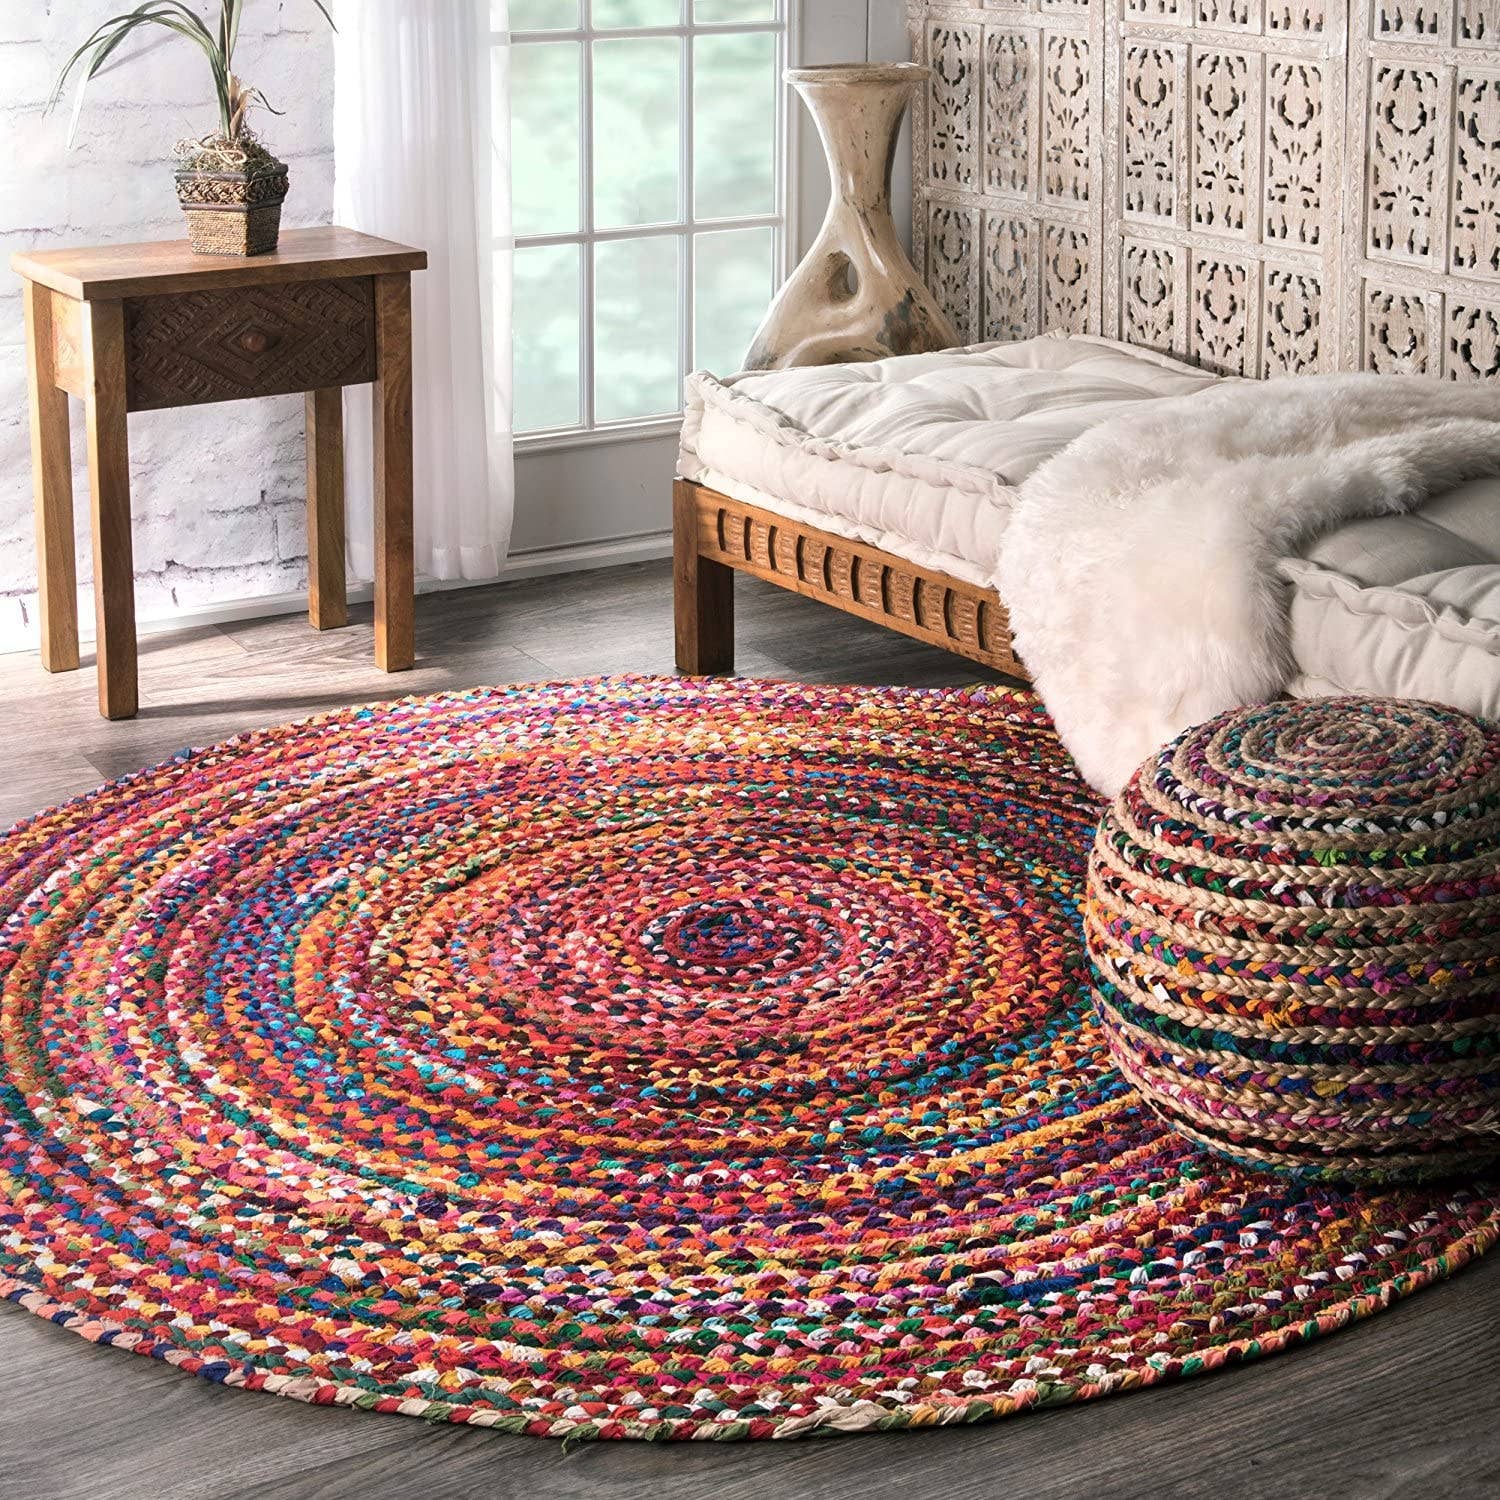 Blue Chindi Rug, 5 Feet Round Braided Cotton Chindi Area Rugs, Reversible  Round Floor Rug, Dining Room Rugs -  Canada